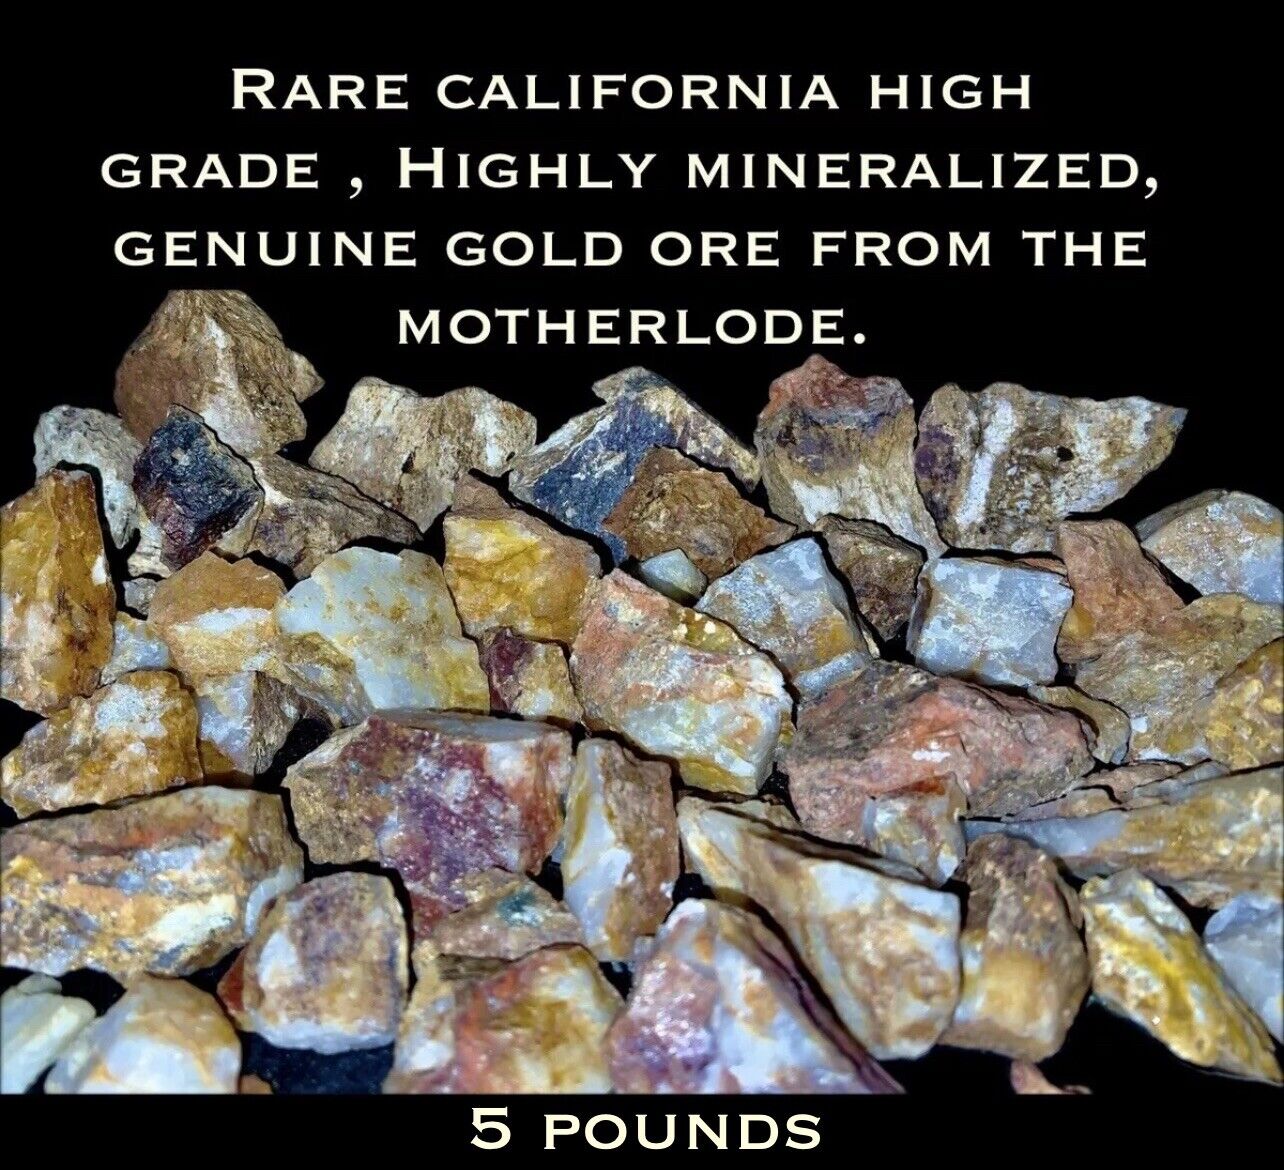 5 Lb HIGH GRADE HIGHLY MINERALIZED GOLD ORE W/VISIBLE GOLD FROM THE MOTHERLODE